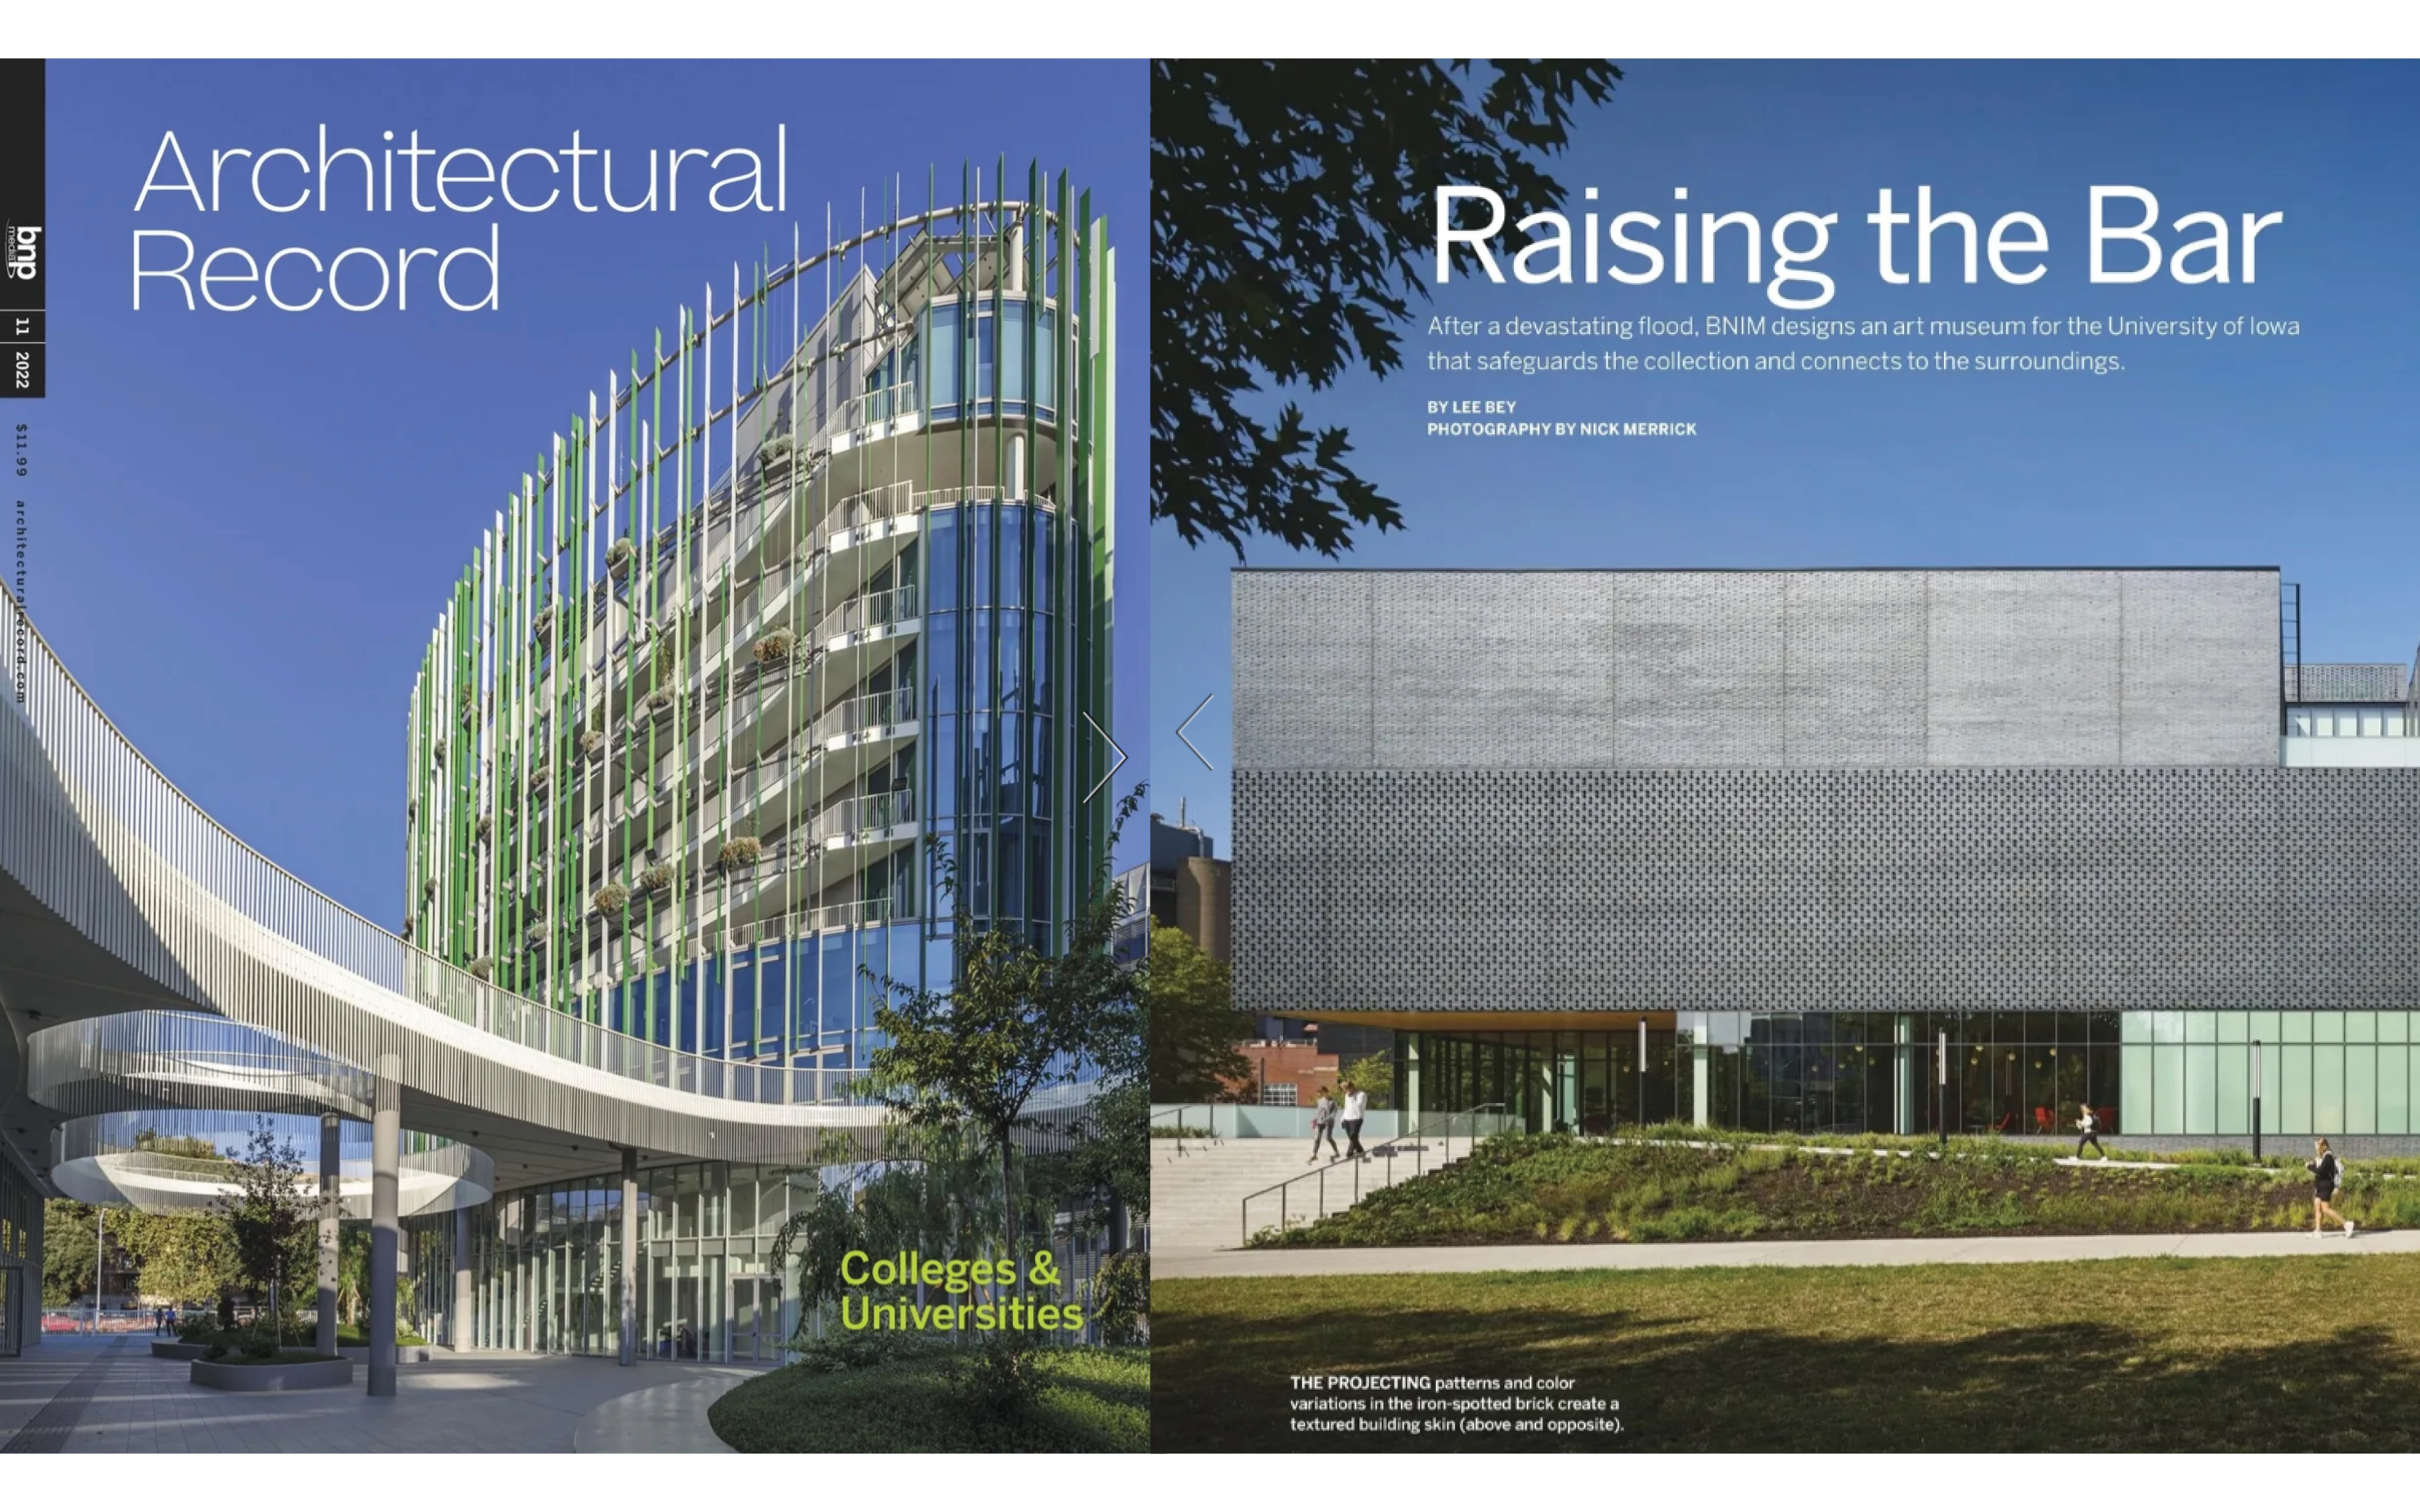 The University of Iowa Stanley Museum of Art Featured in November Issue of Architectural Record